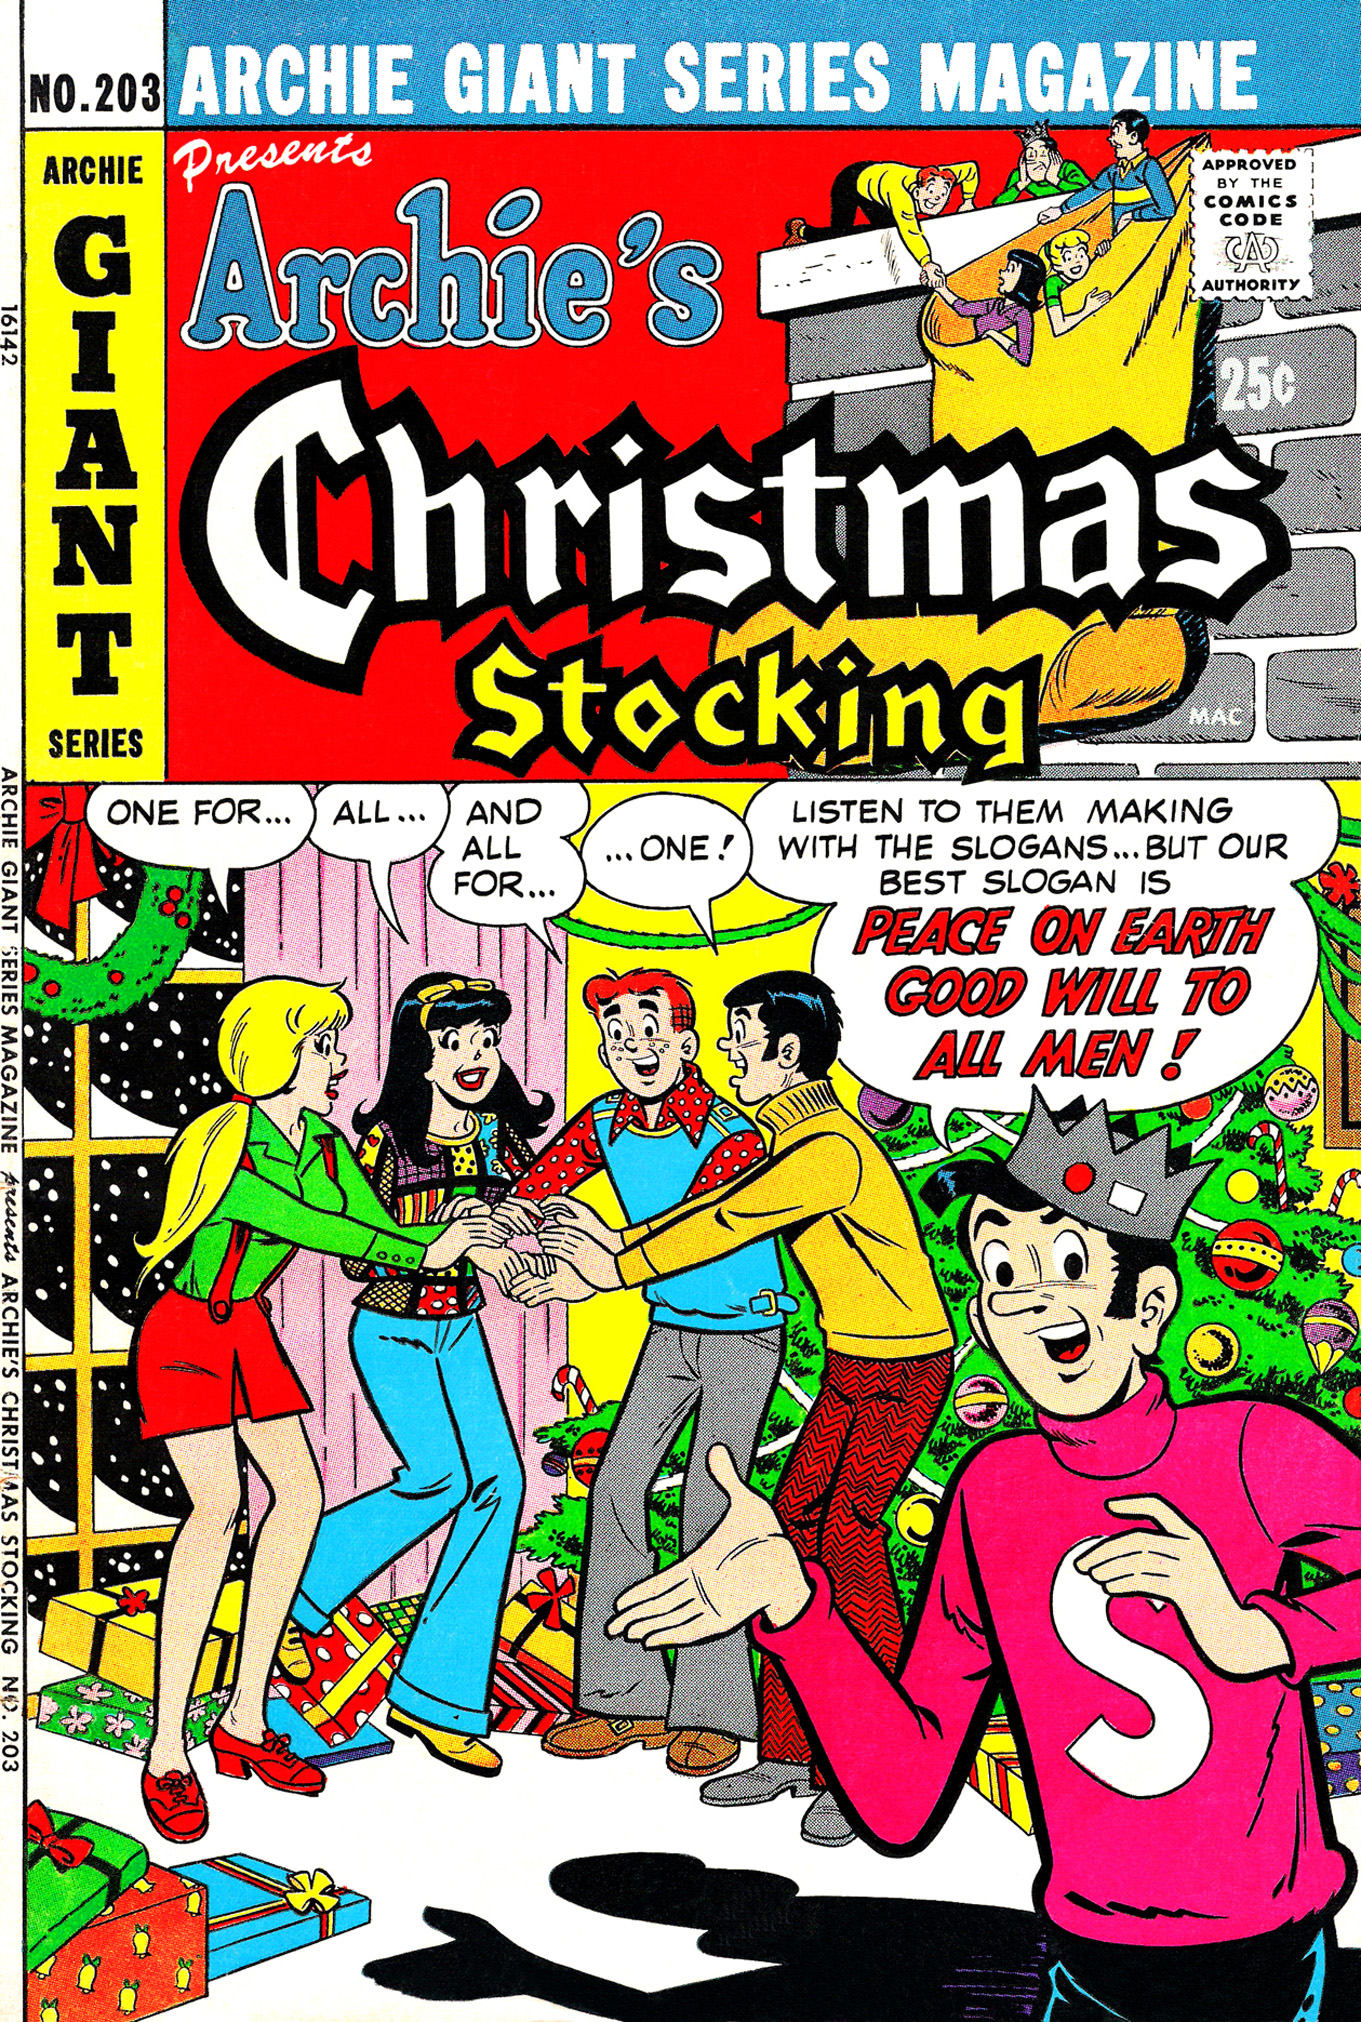 Read online Archie Giant Series Magazine comic -  Issue #203 - 1